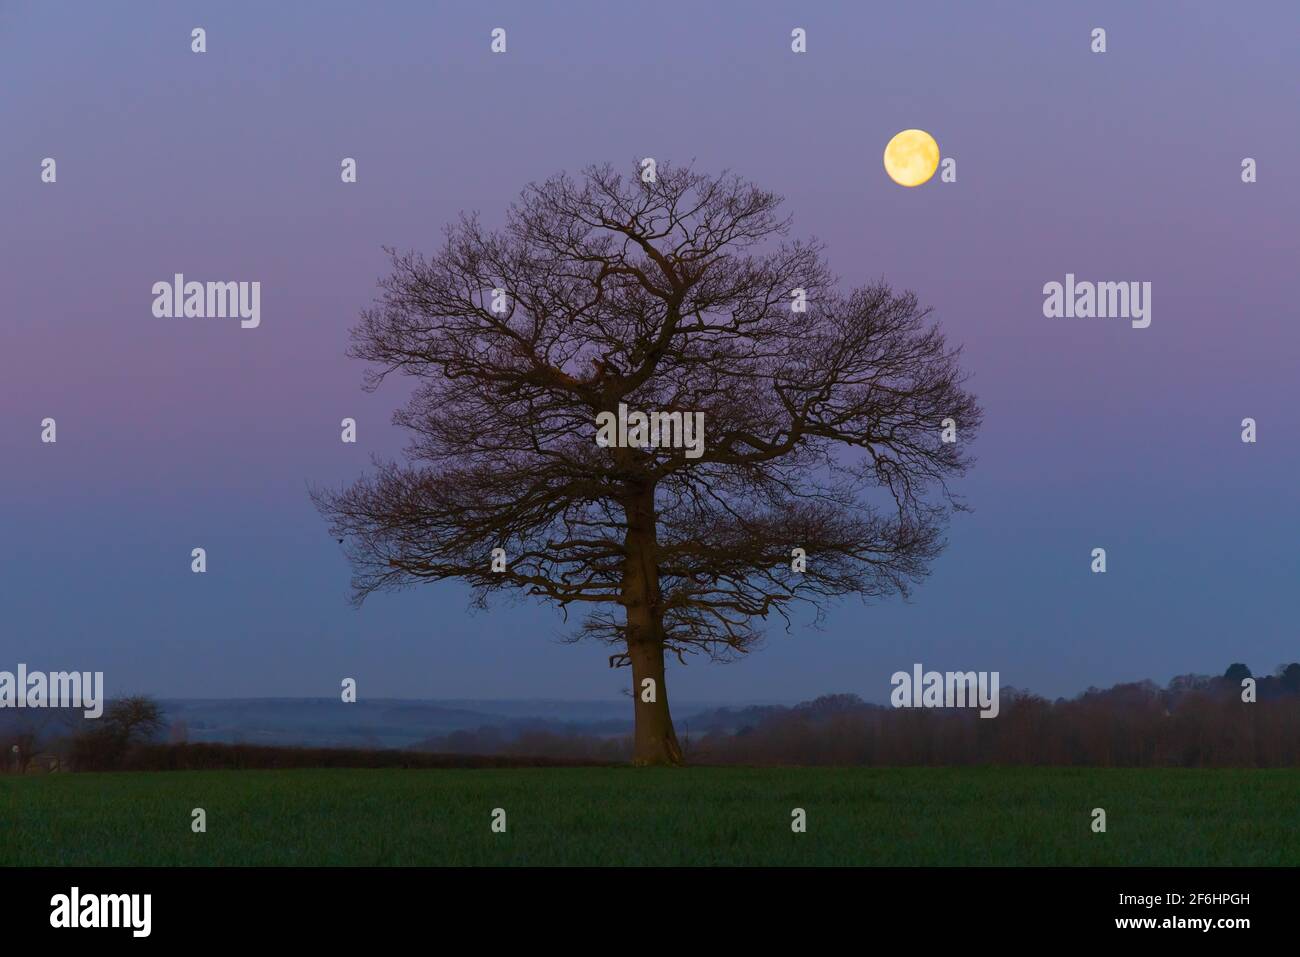 Solitary oak tree in a field in early spring at twilight, with the moon in the background. Hertfordshire. UK Stock Photo